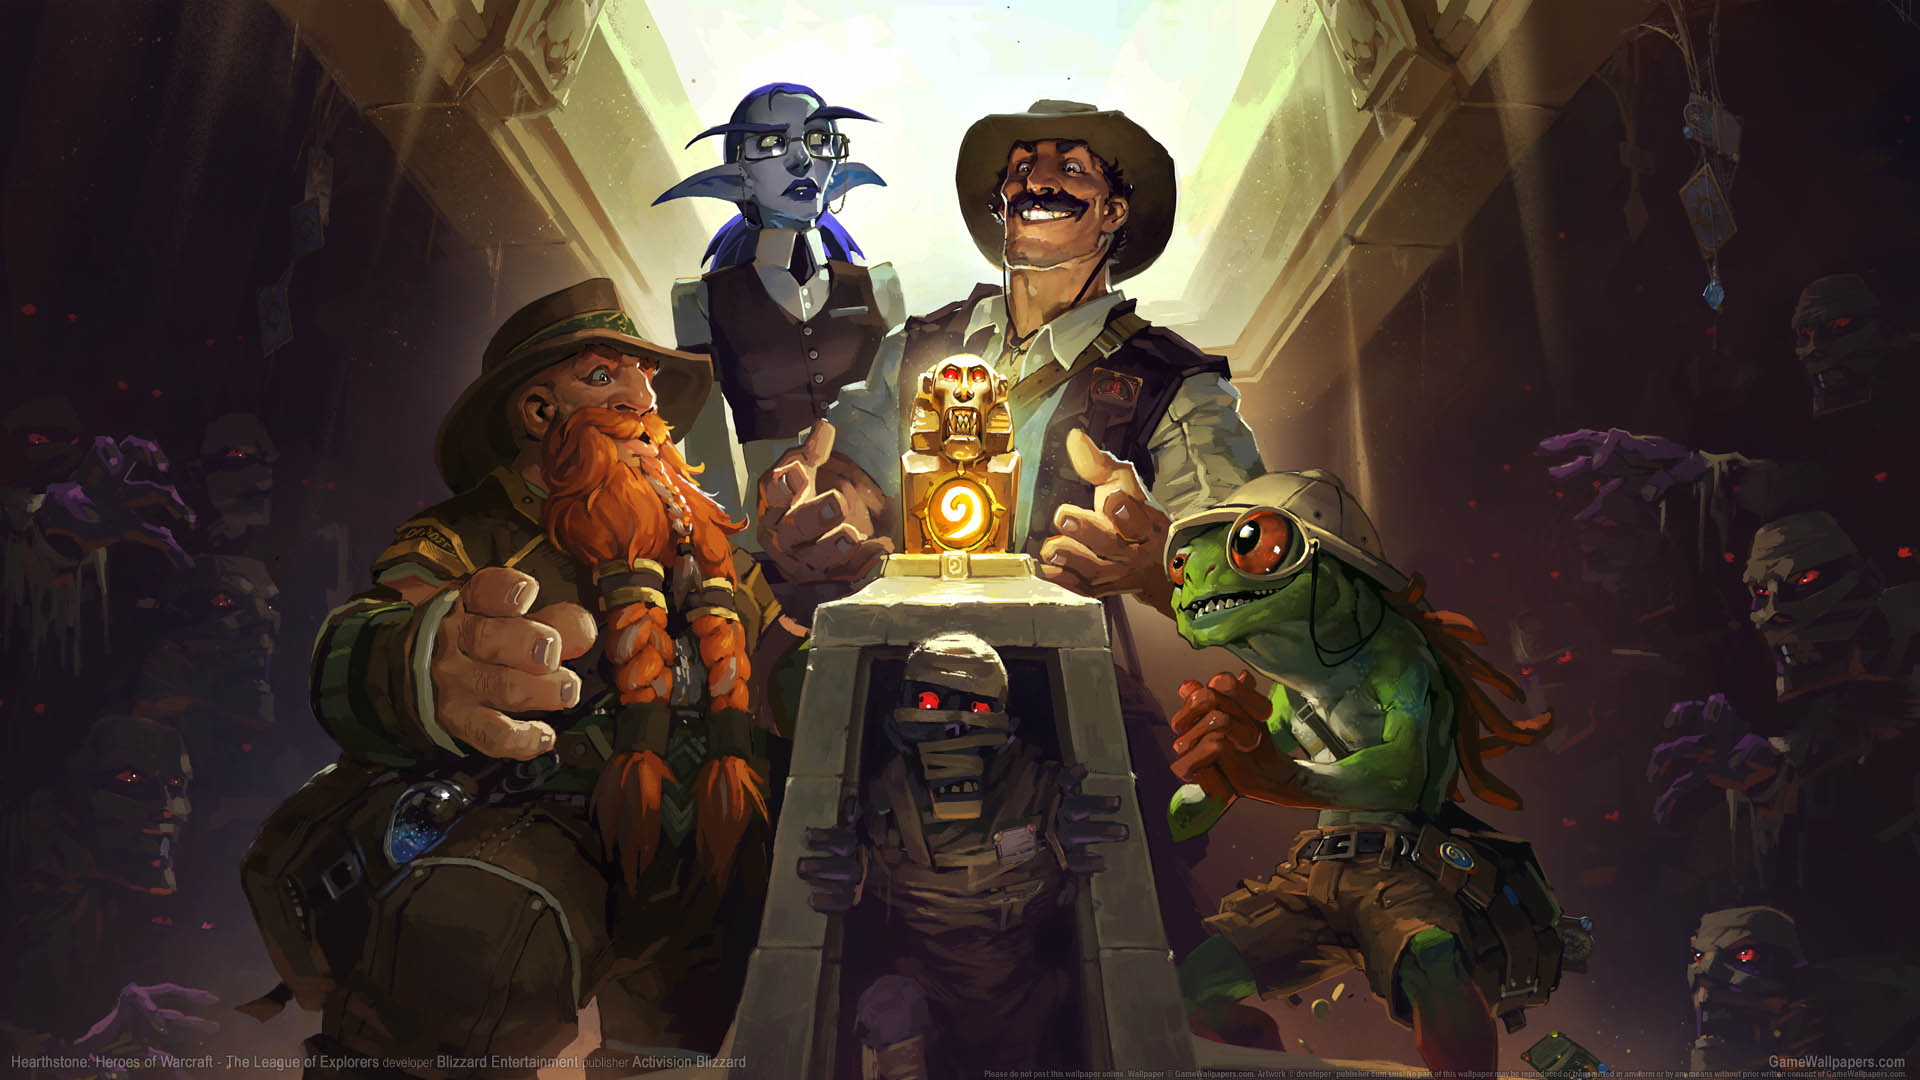 Hearthstone: Heroes of Warcraft - The League of Explorers fond d'cran 01 1920x1080